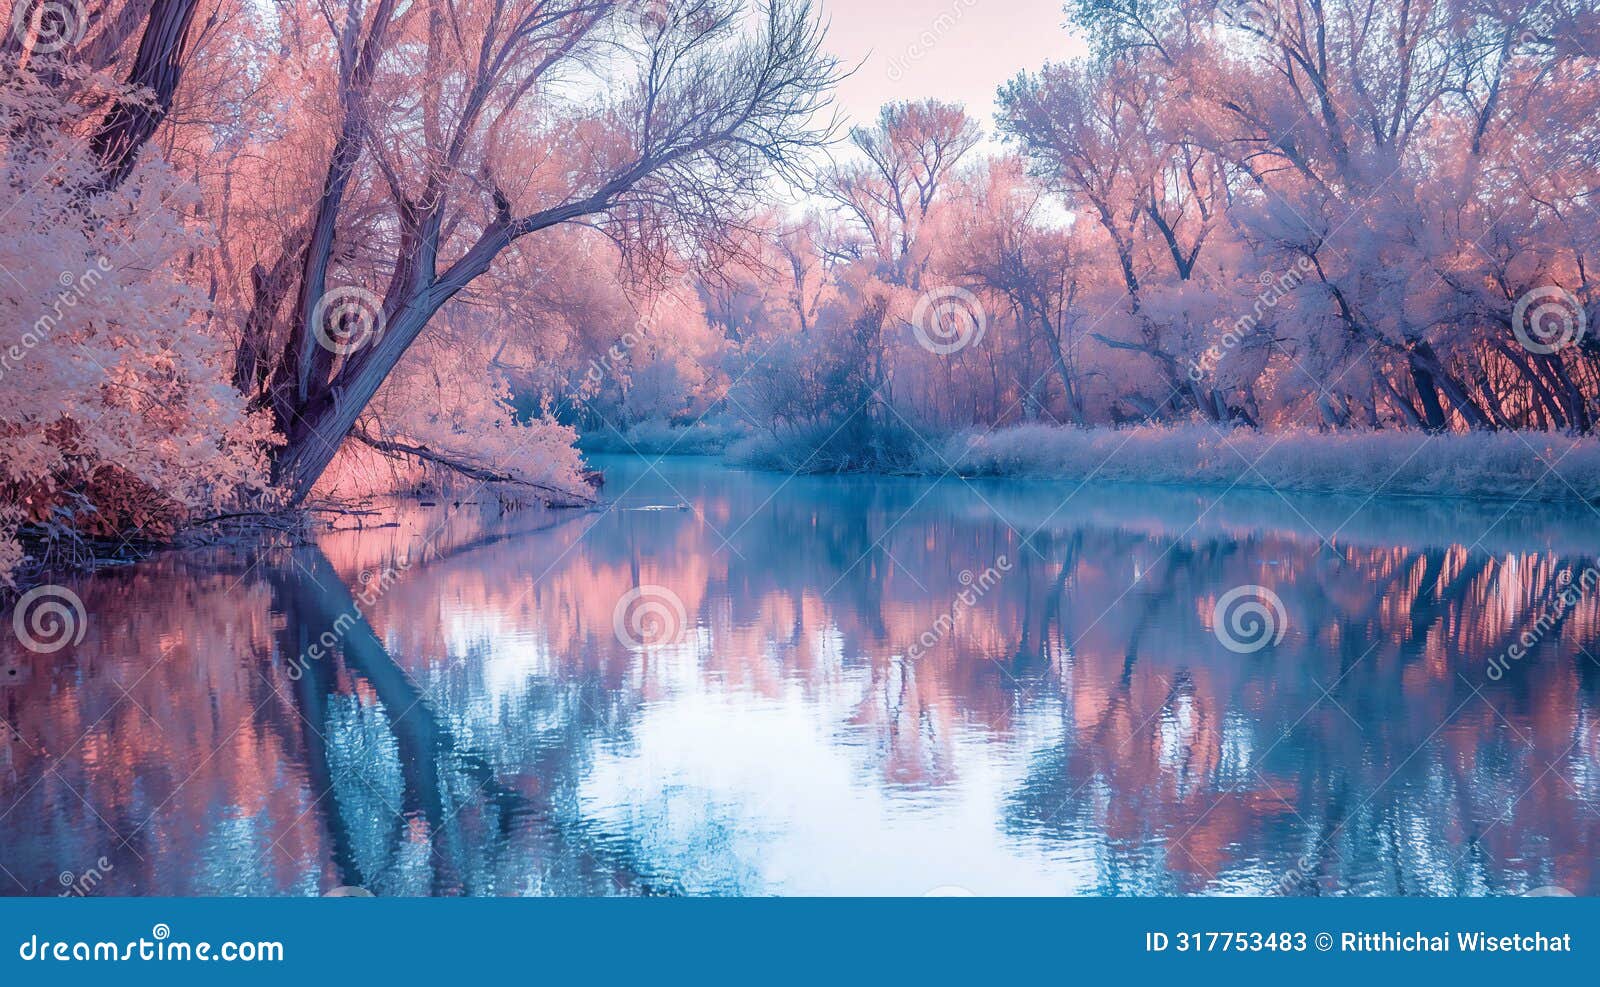 serene river scene with pink-hued trees and reflections in the calm blue water under a pastel sky